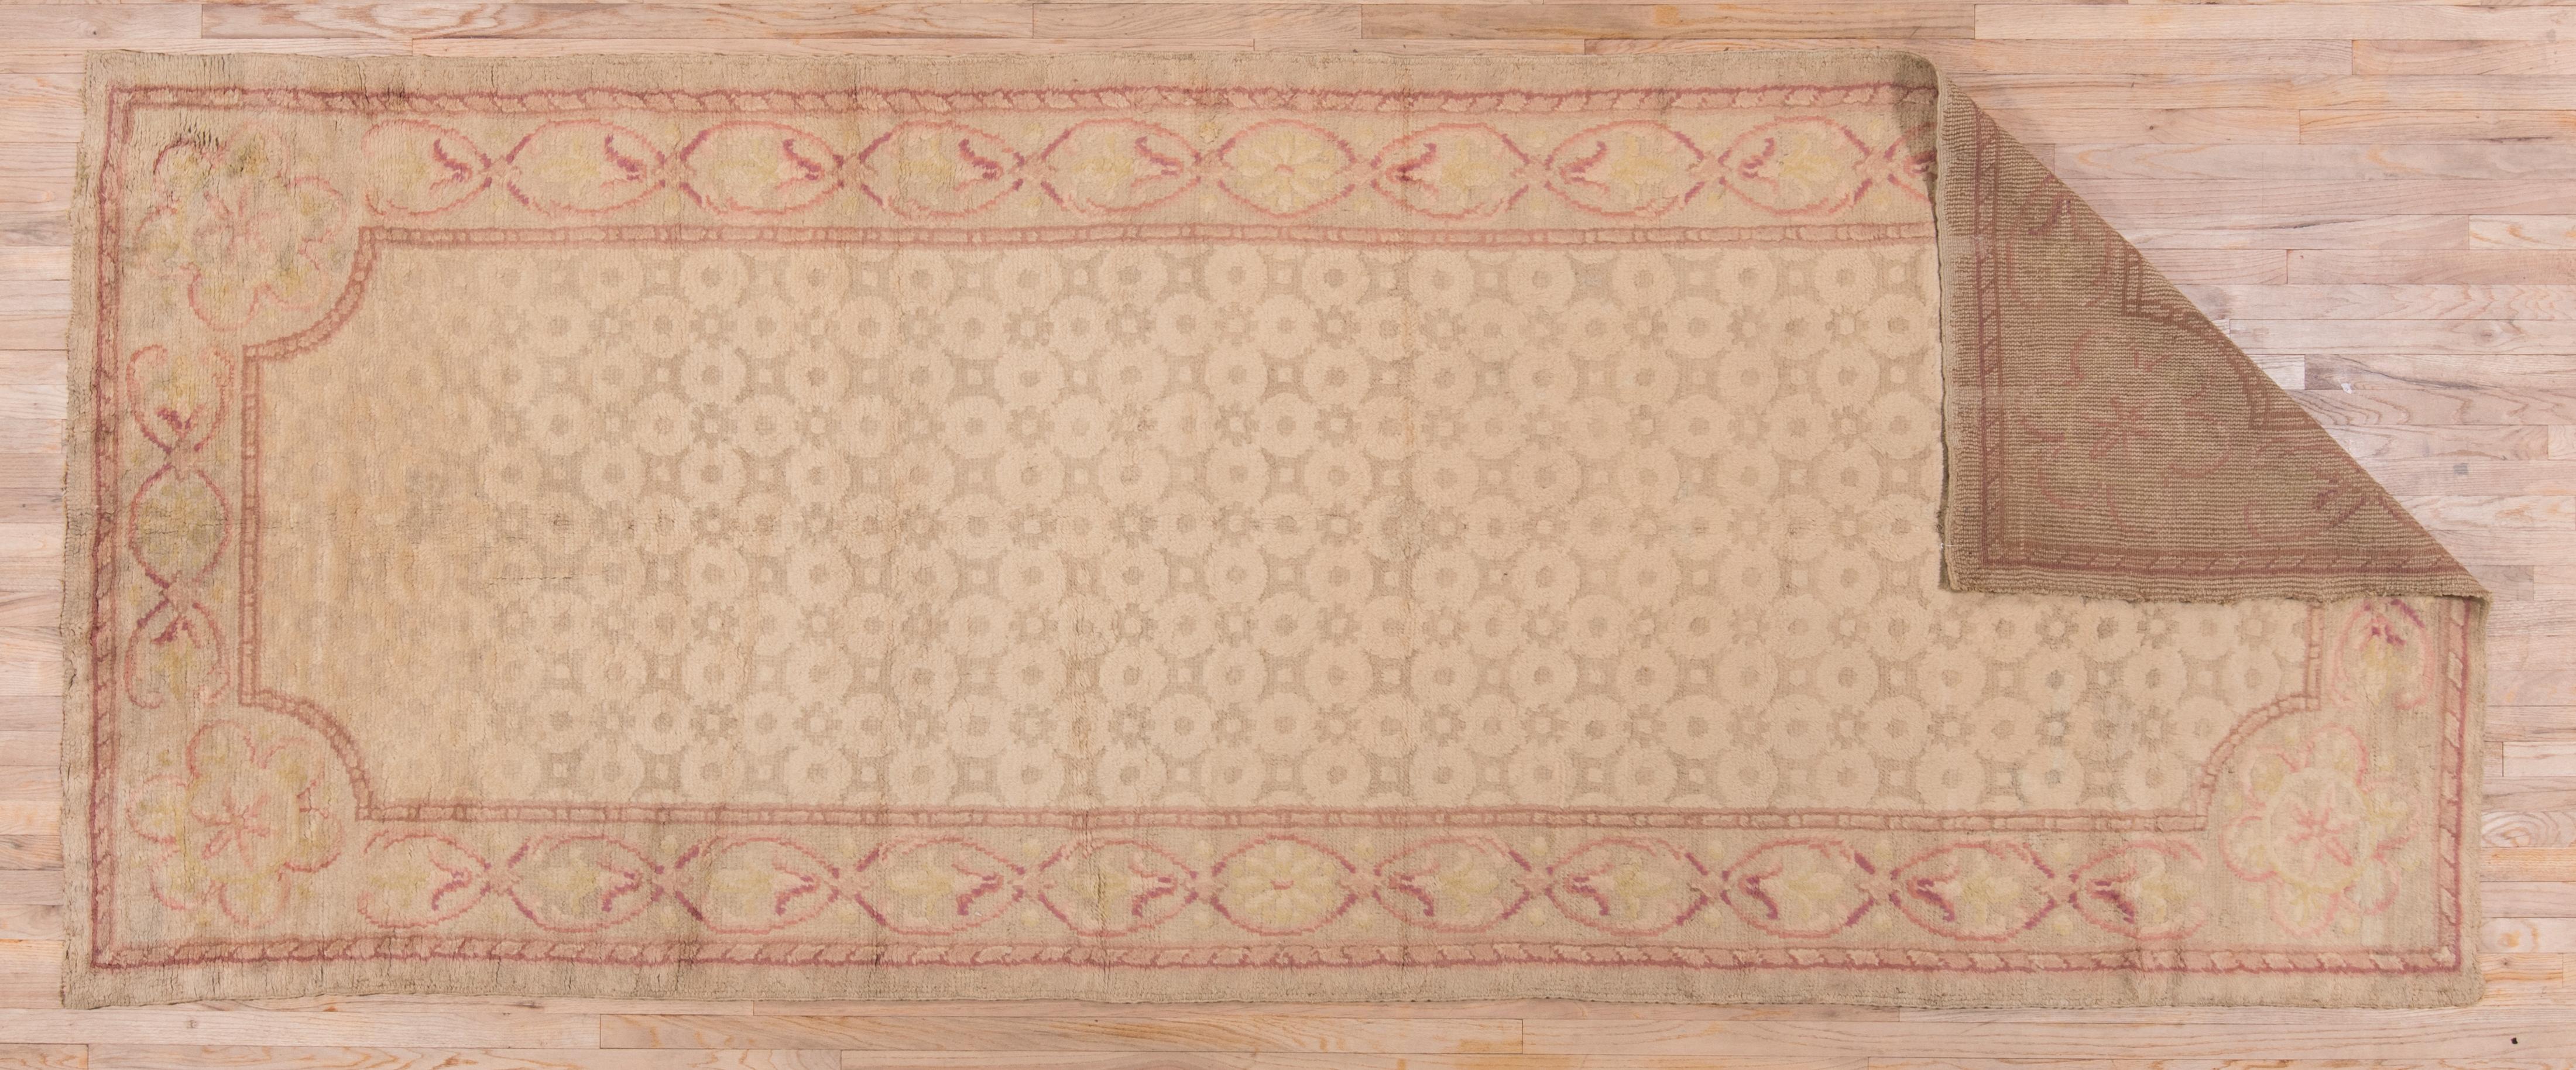 This thick, heavy European carpet in the Art Deco style features a sandy beige field with a small octagon and square repeating pattern and roundly beveled corners. The tonally end suite border shows ellipses with flowers or stars. Light palette with